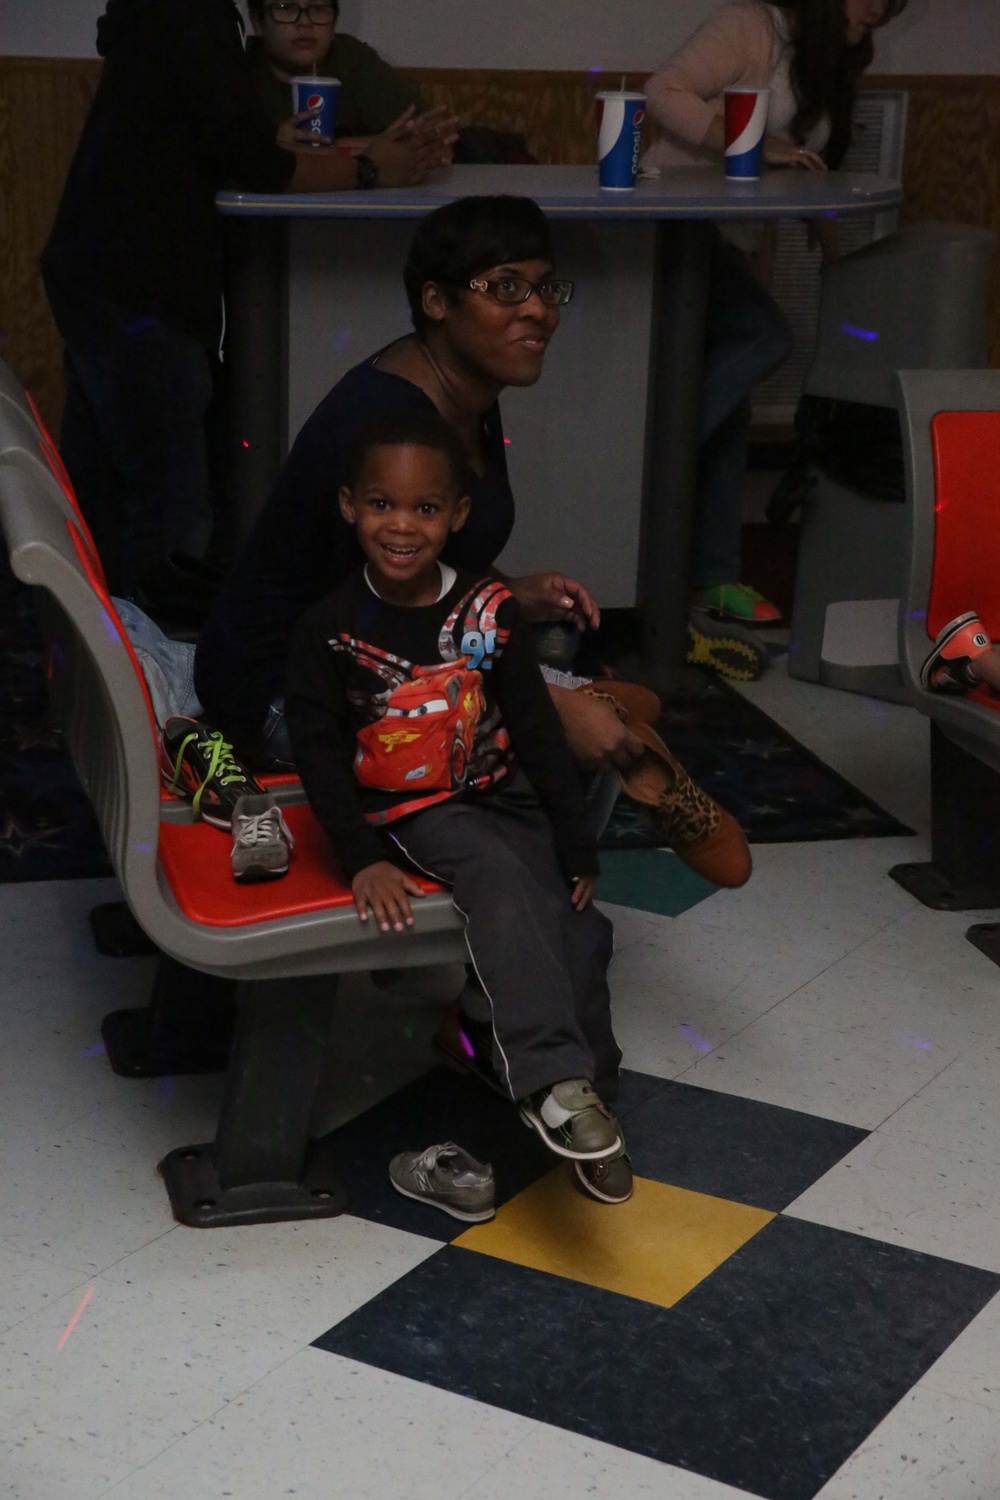 Quantico bowling center caters to families